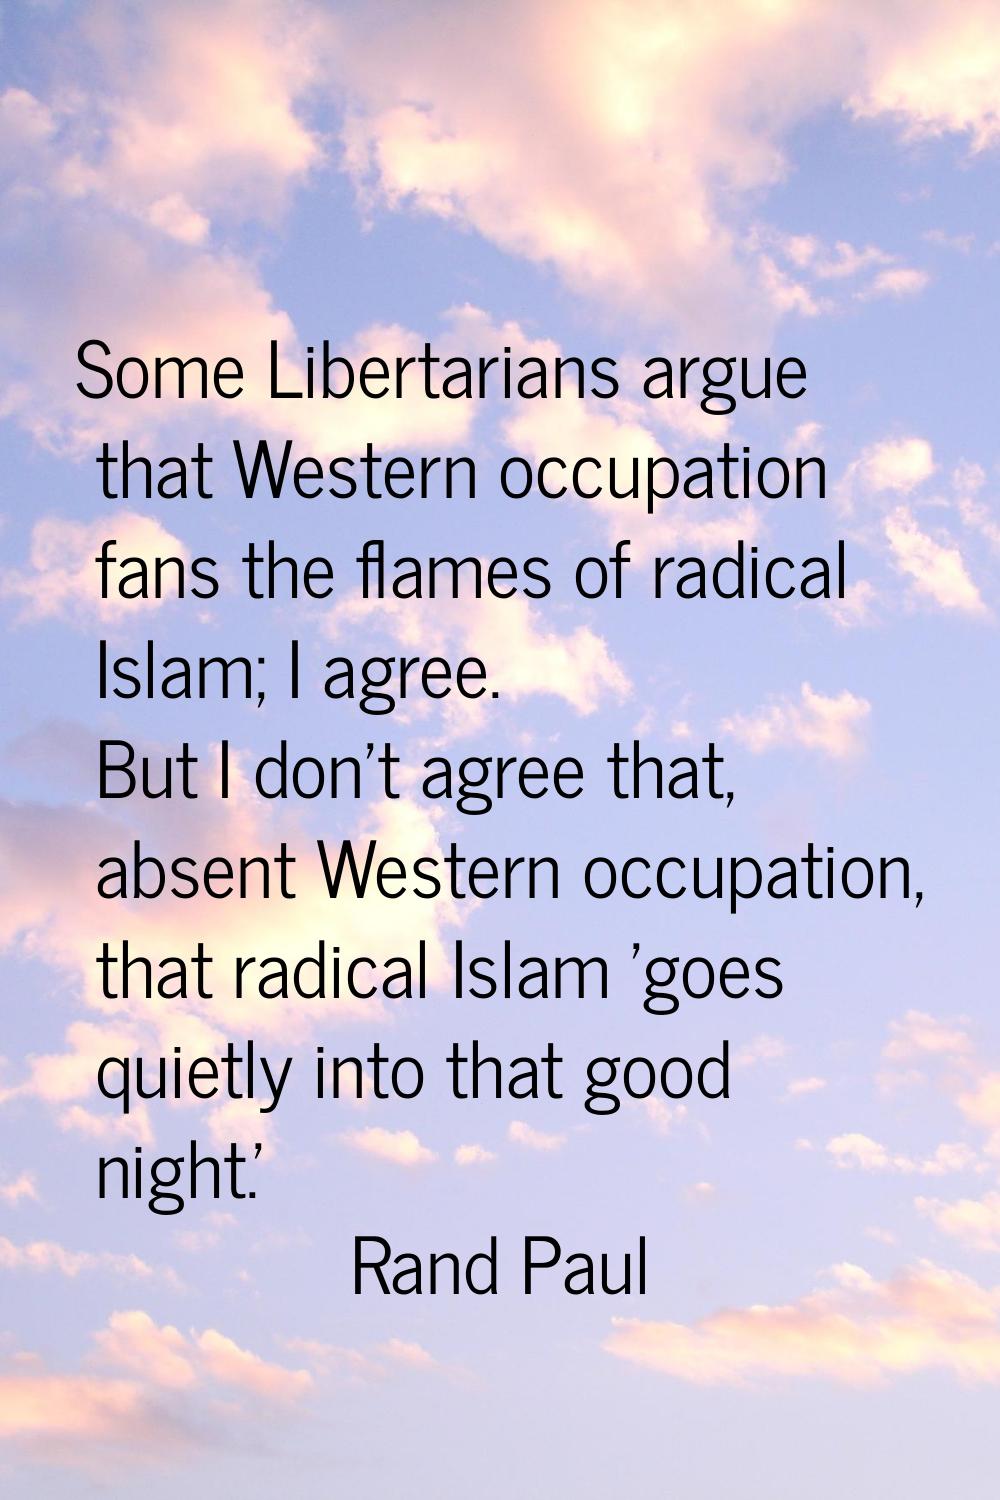 Some Libertarians argue that Western occupation fans the flames of radical Islam; I agree. But I do